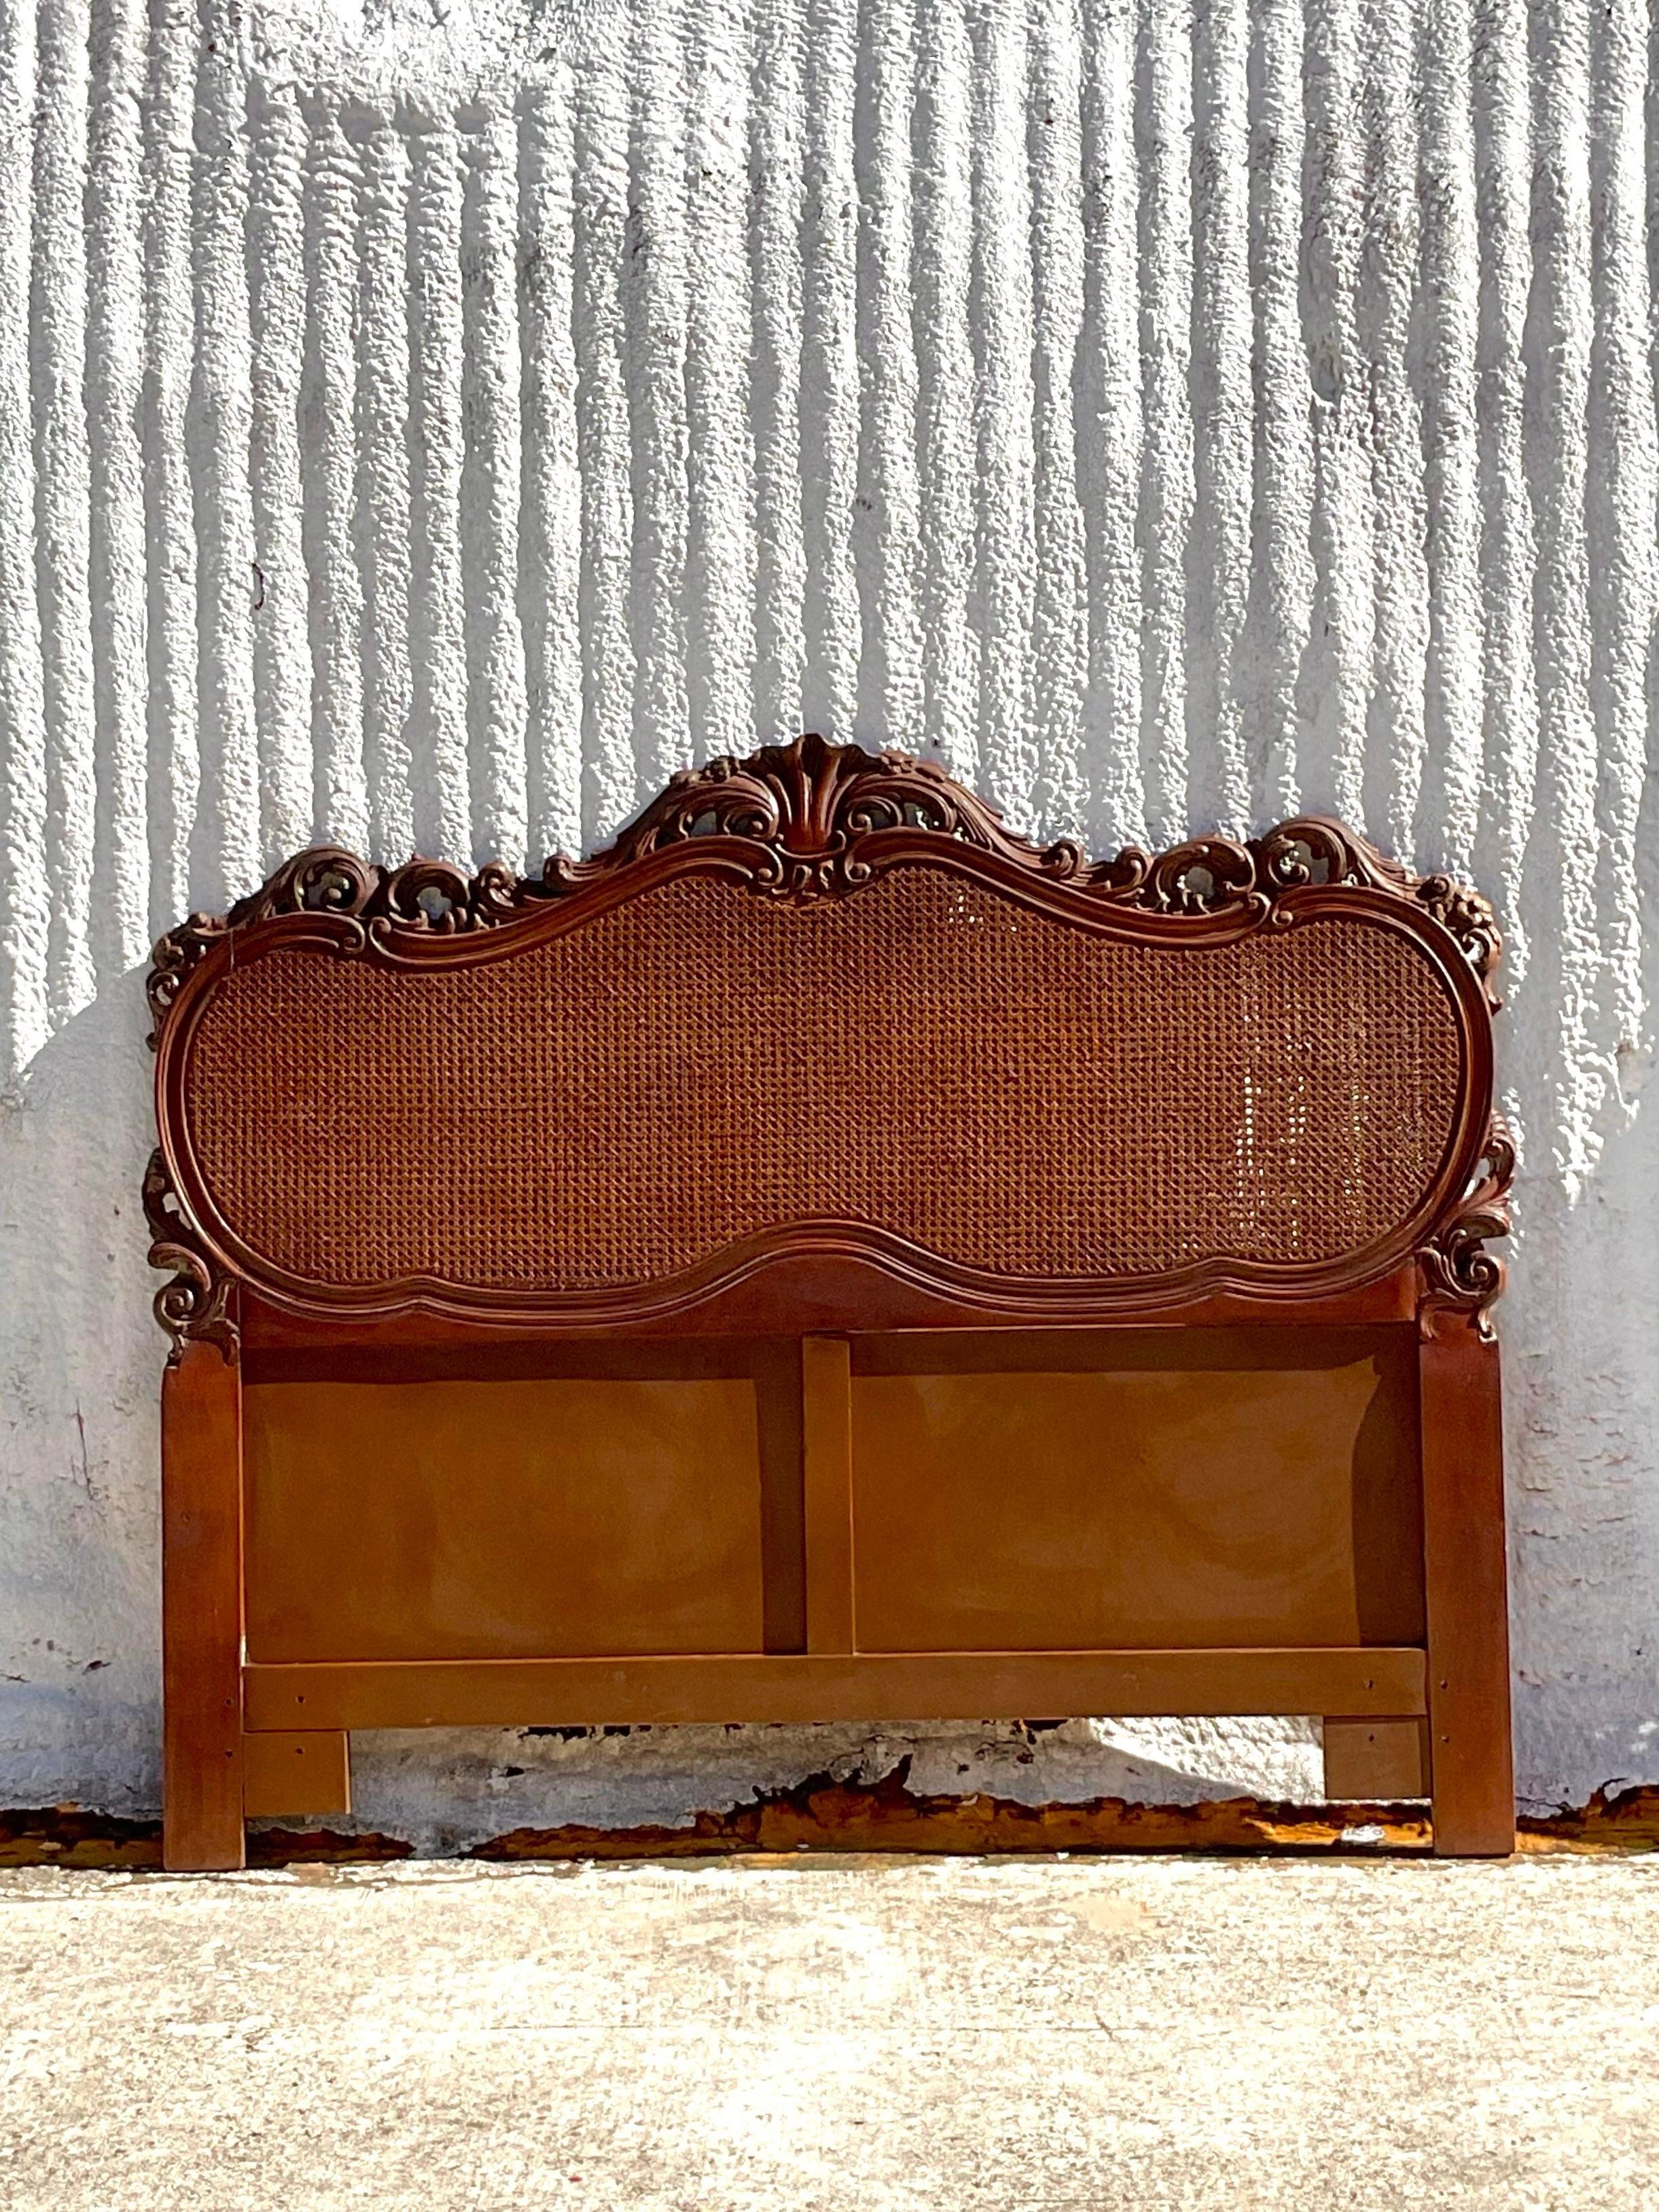 A gorgeous vintage headboard in a French style with cane on both the front and the back. We have a matching pair. The intricate wood carvings are delicate and gorgeous. Acquired at a Palm Beach estate.